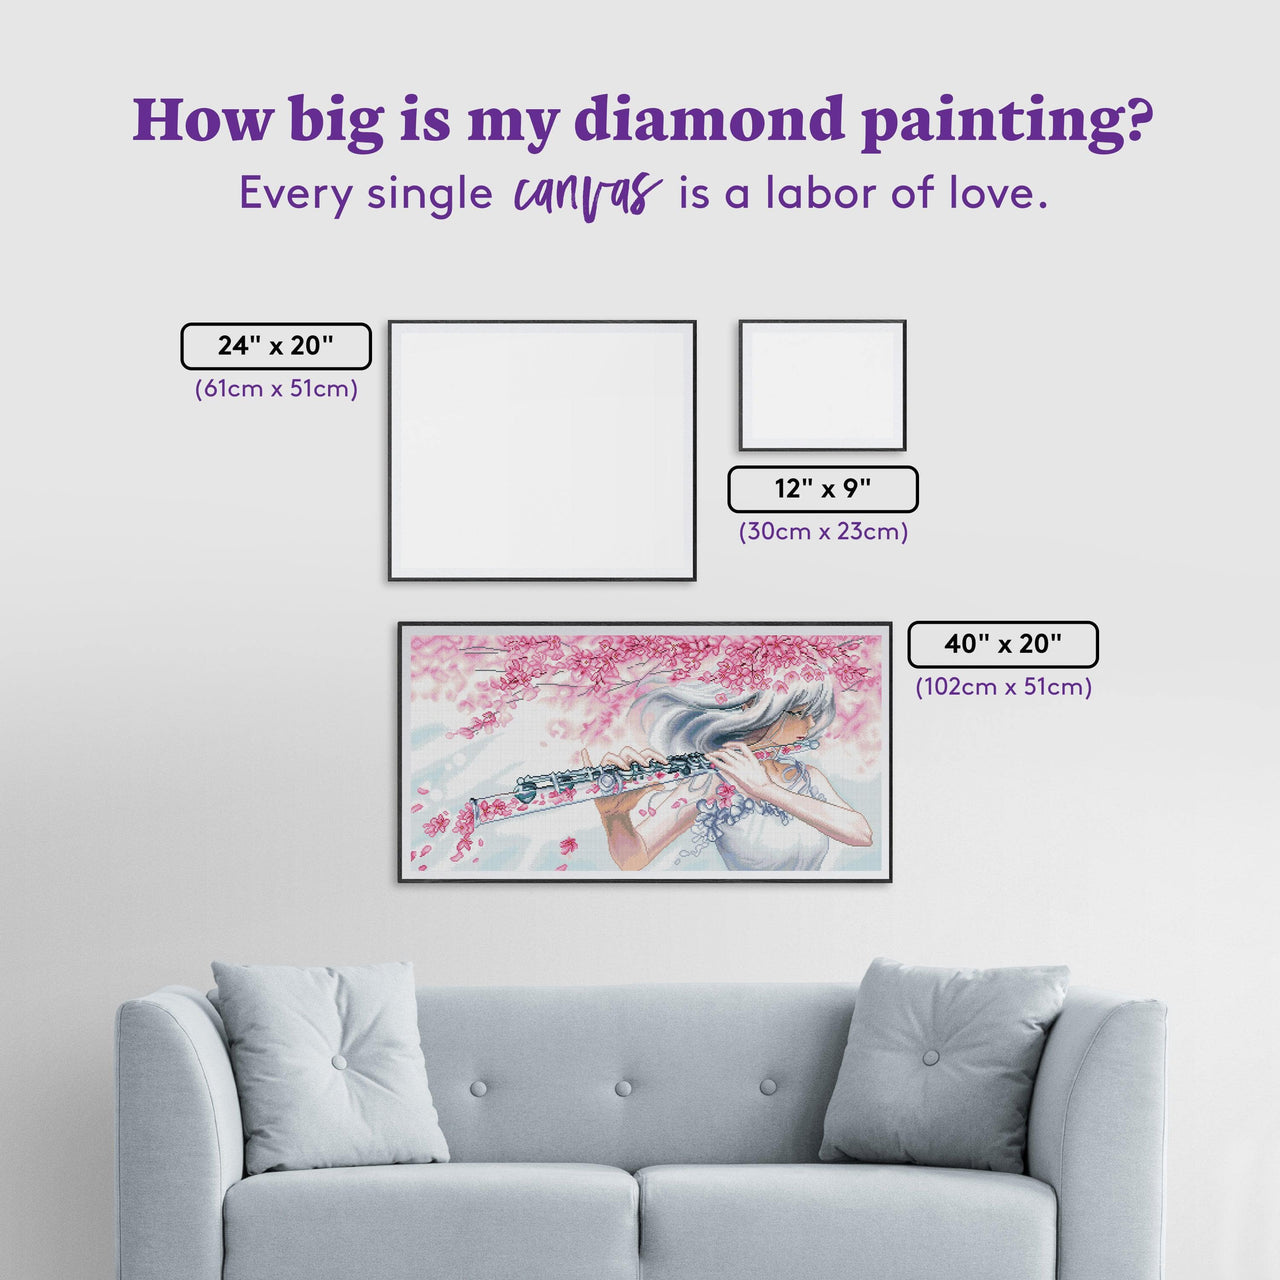 Diamond Painting Petals Fall 40" x 20" (102cm x 51cm) / Square with 42 Colors including 2 ABs / 83,436